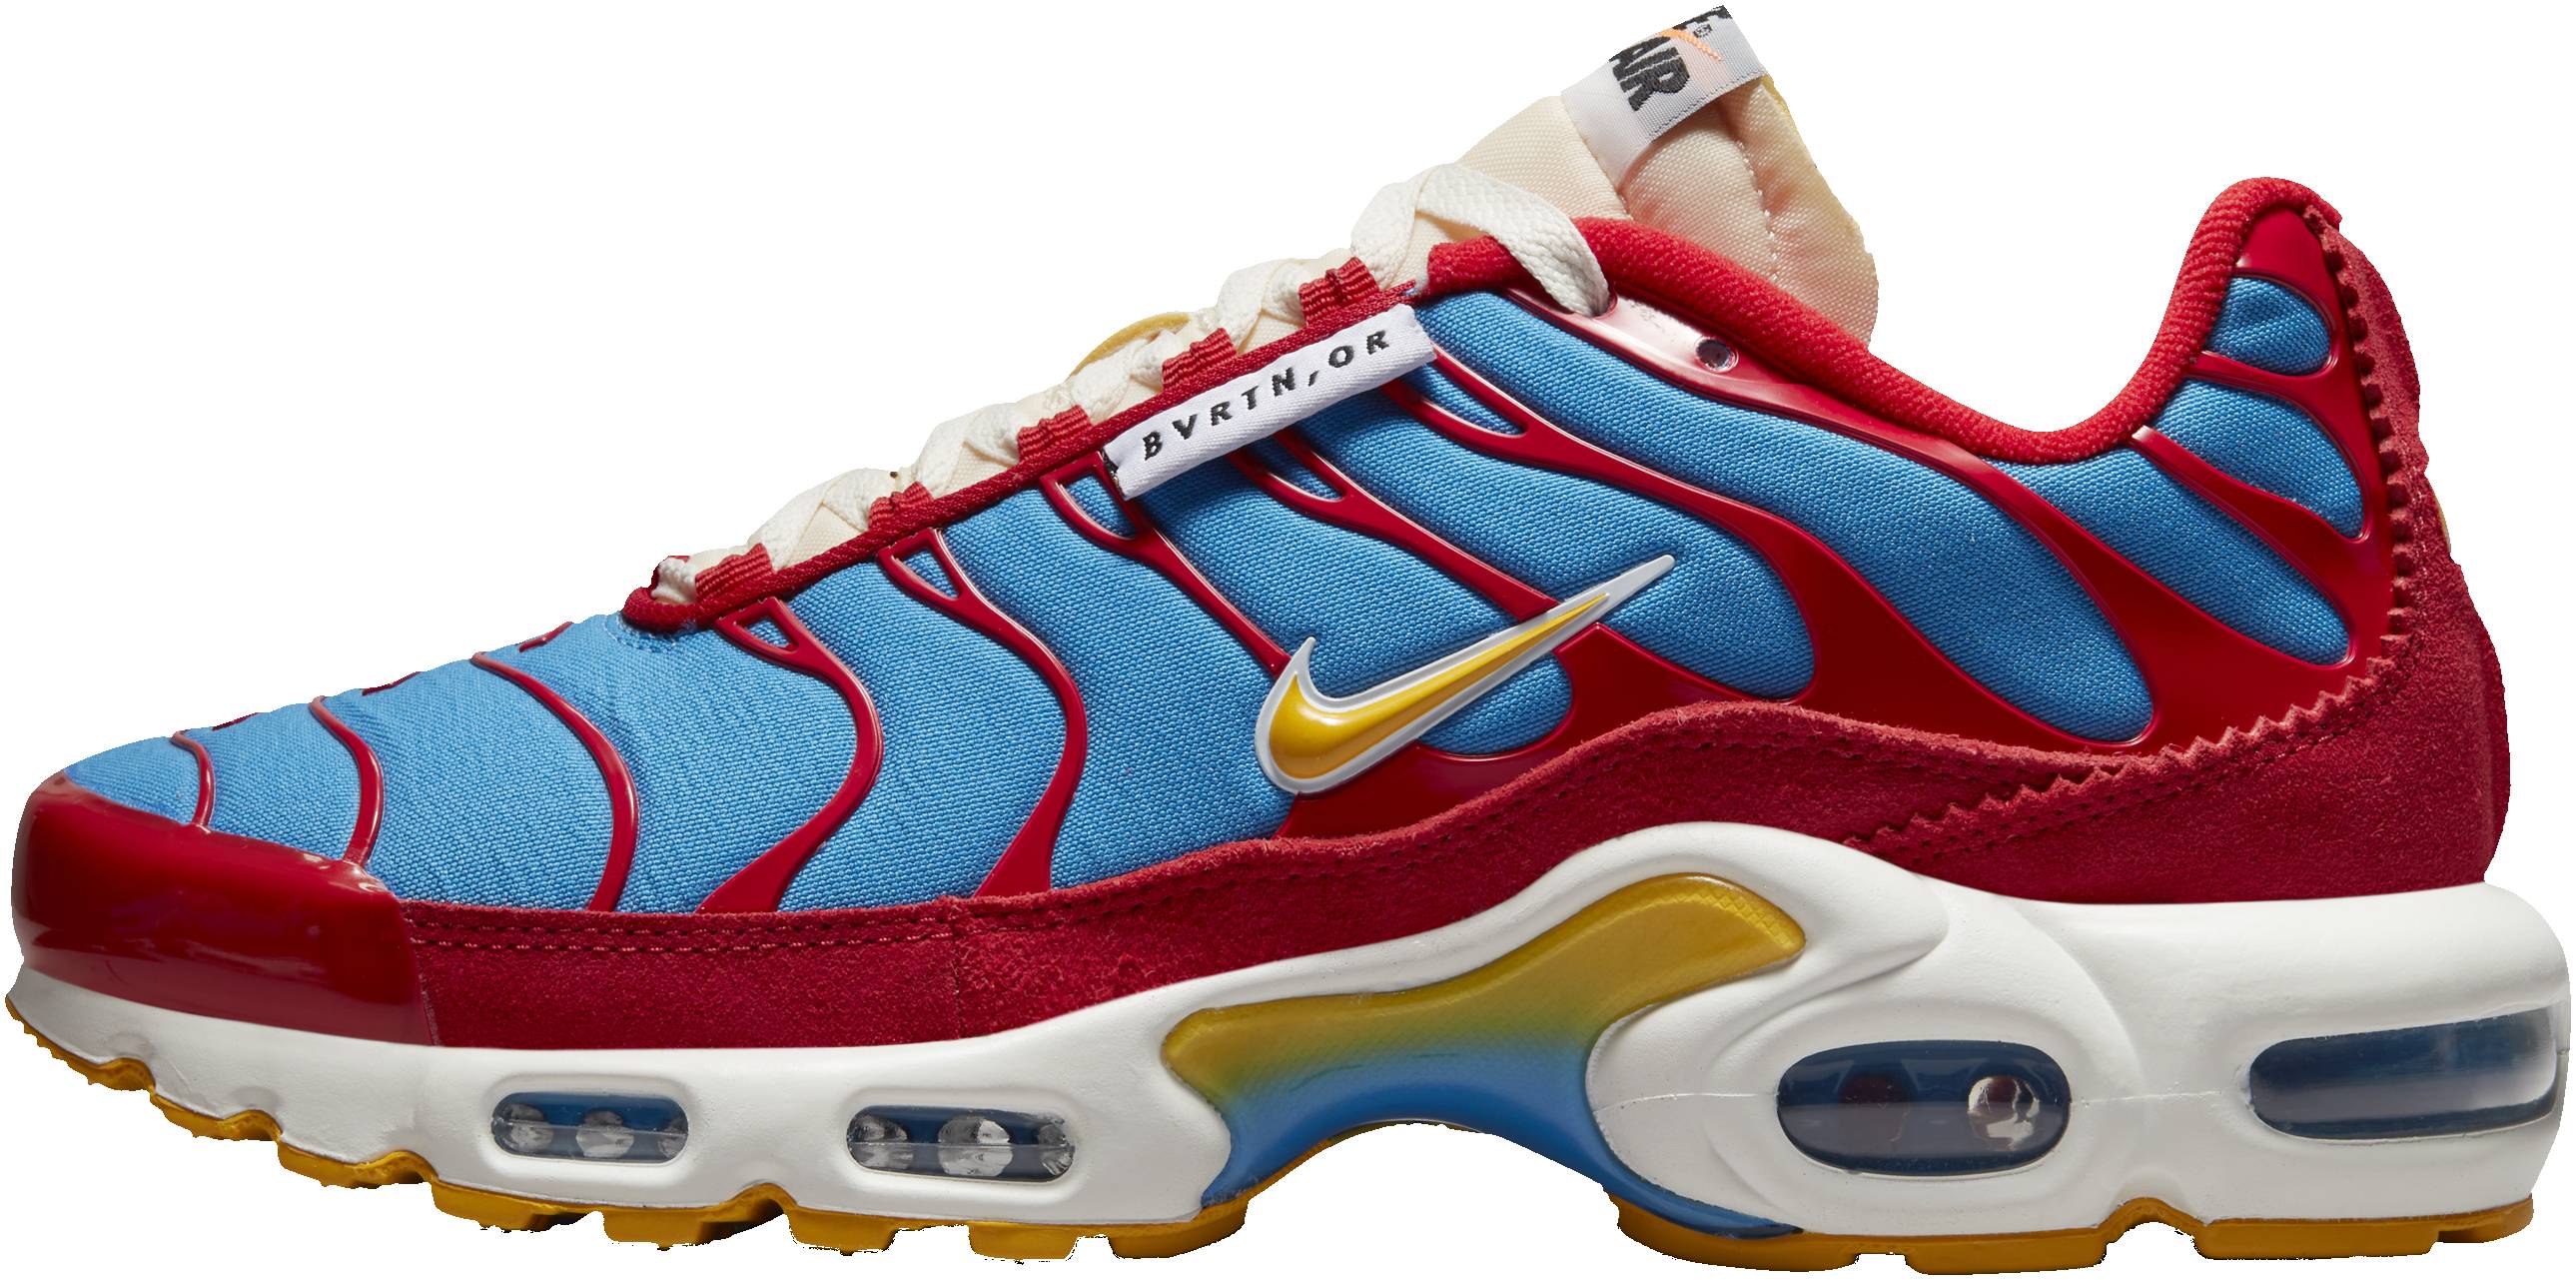 There is a need to with time spoon Nike Air Max Plus TN SE sneakers in 10 colors (only $113) | RunRepeat